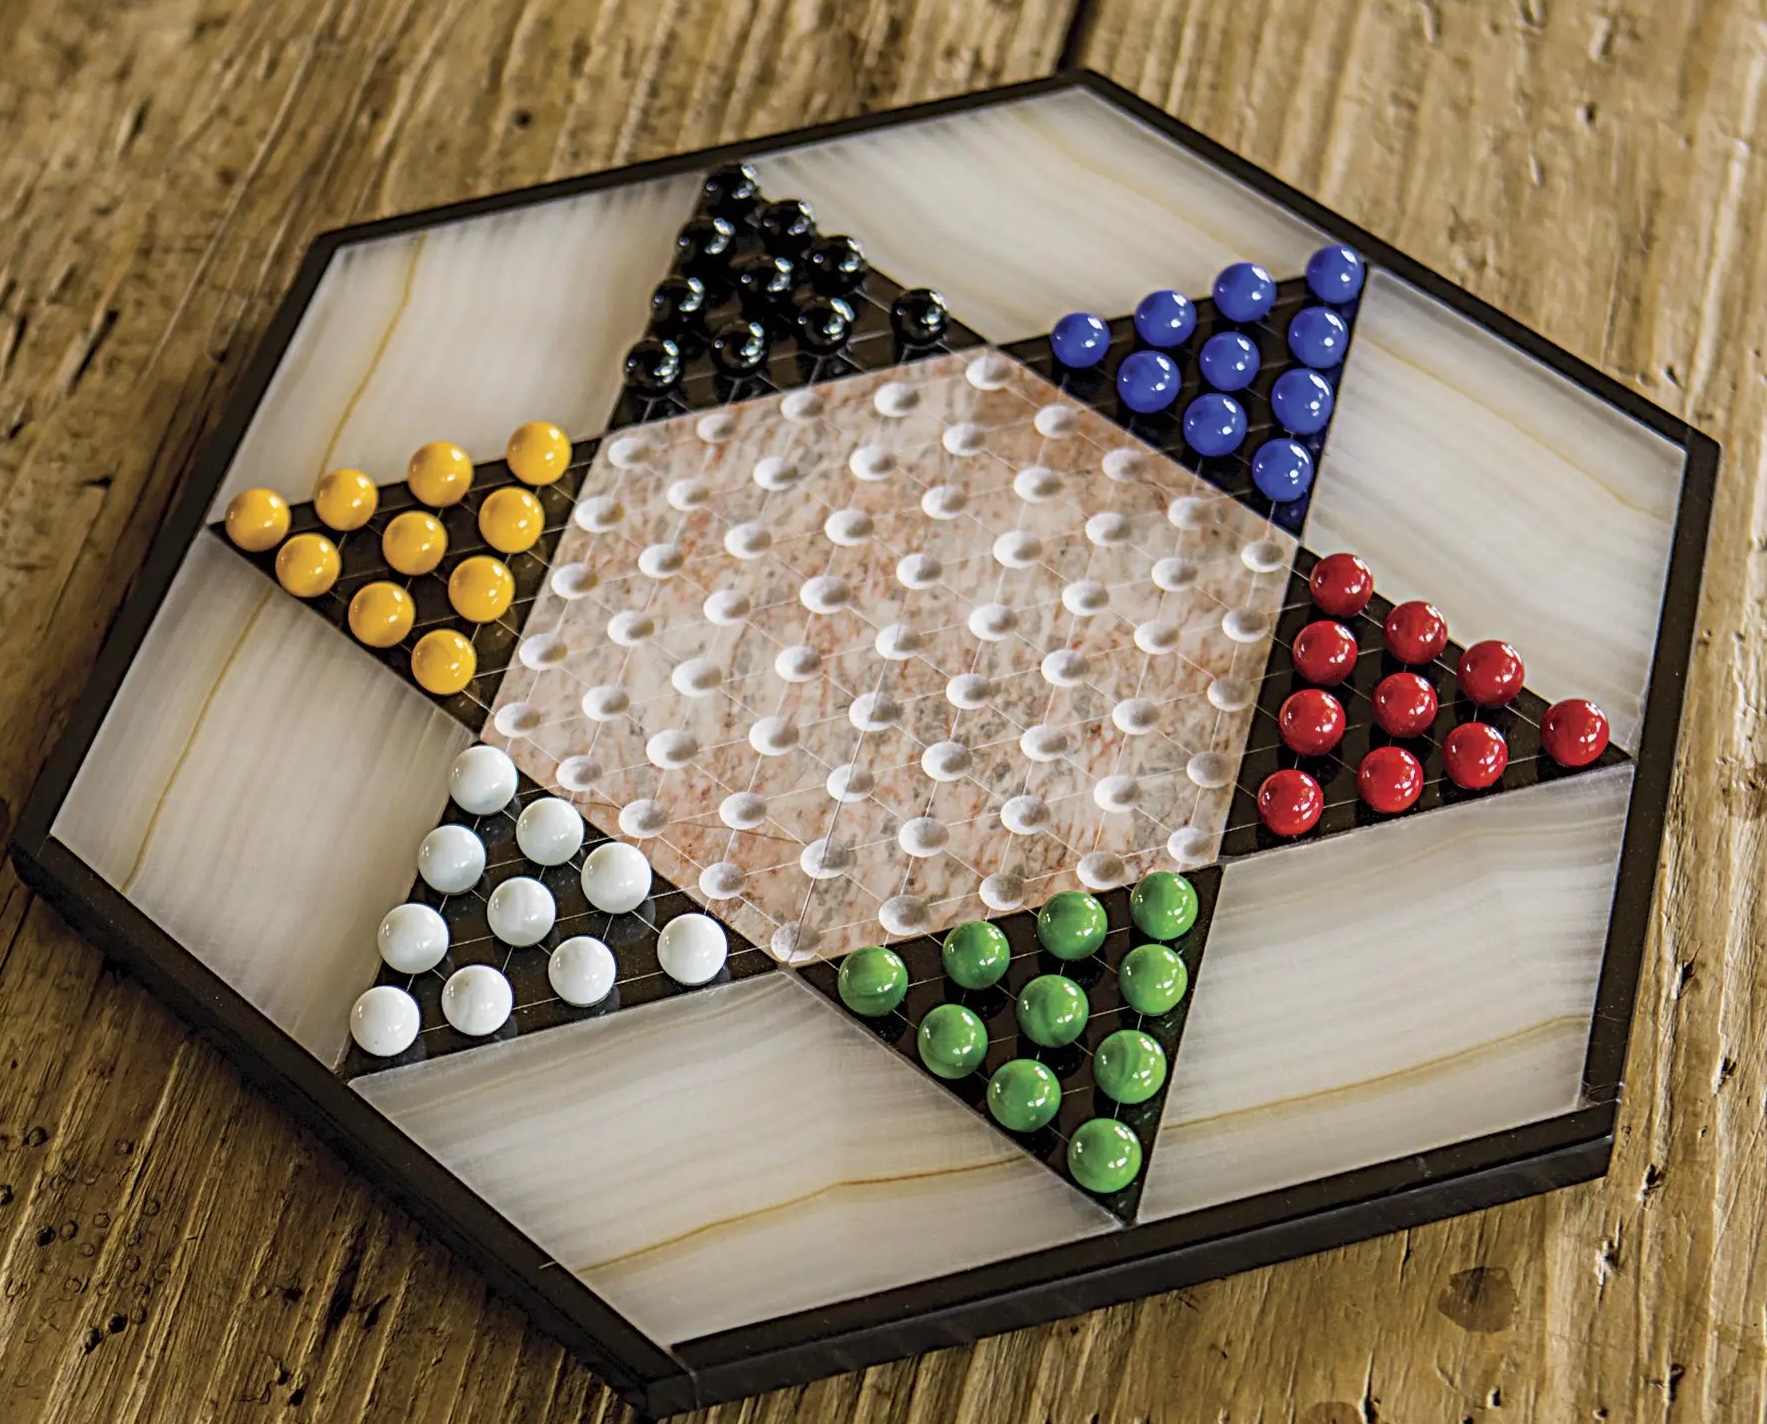 Things people stuck up their nose - chinese checkers